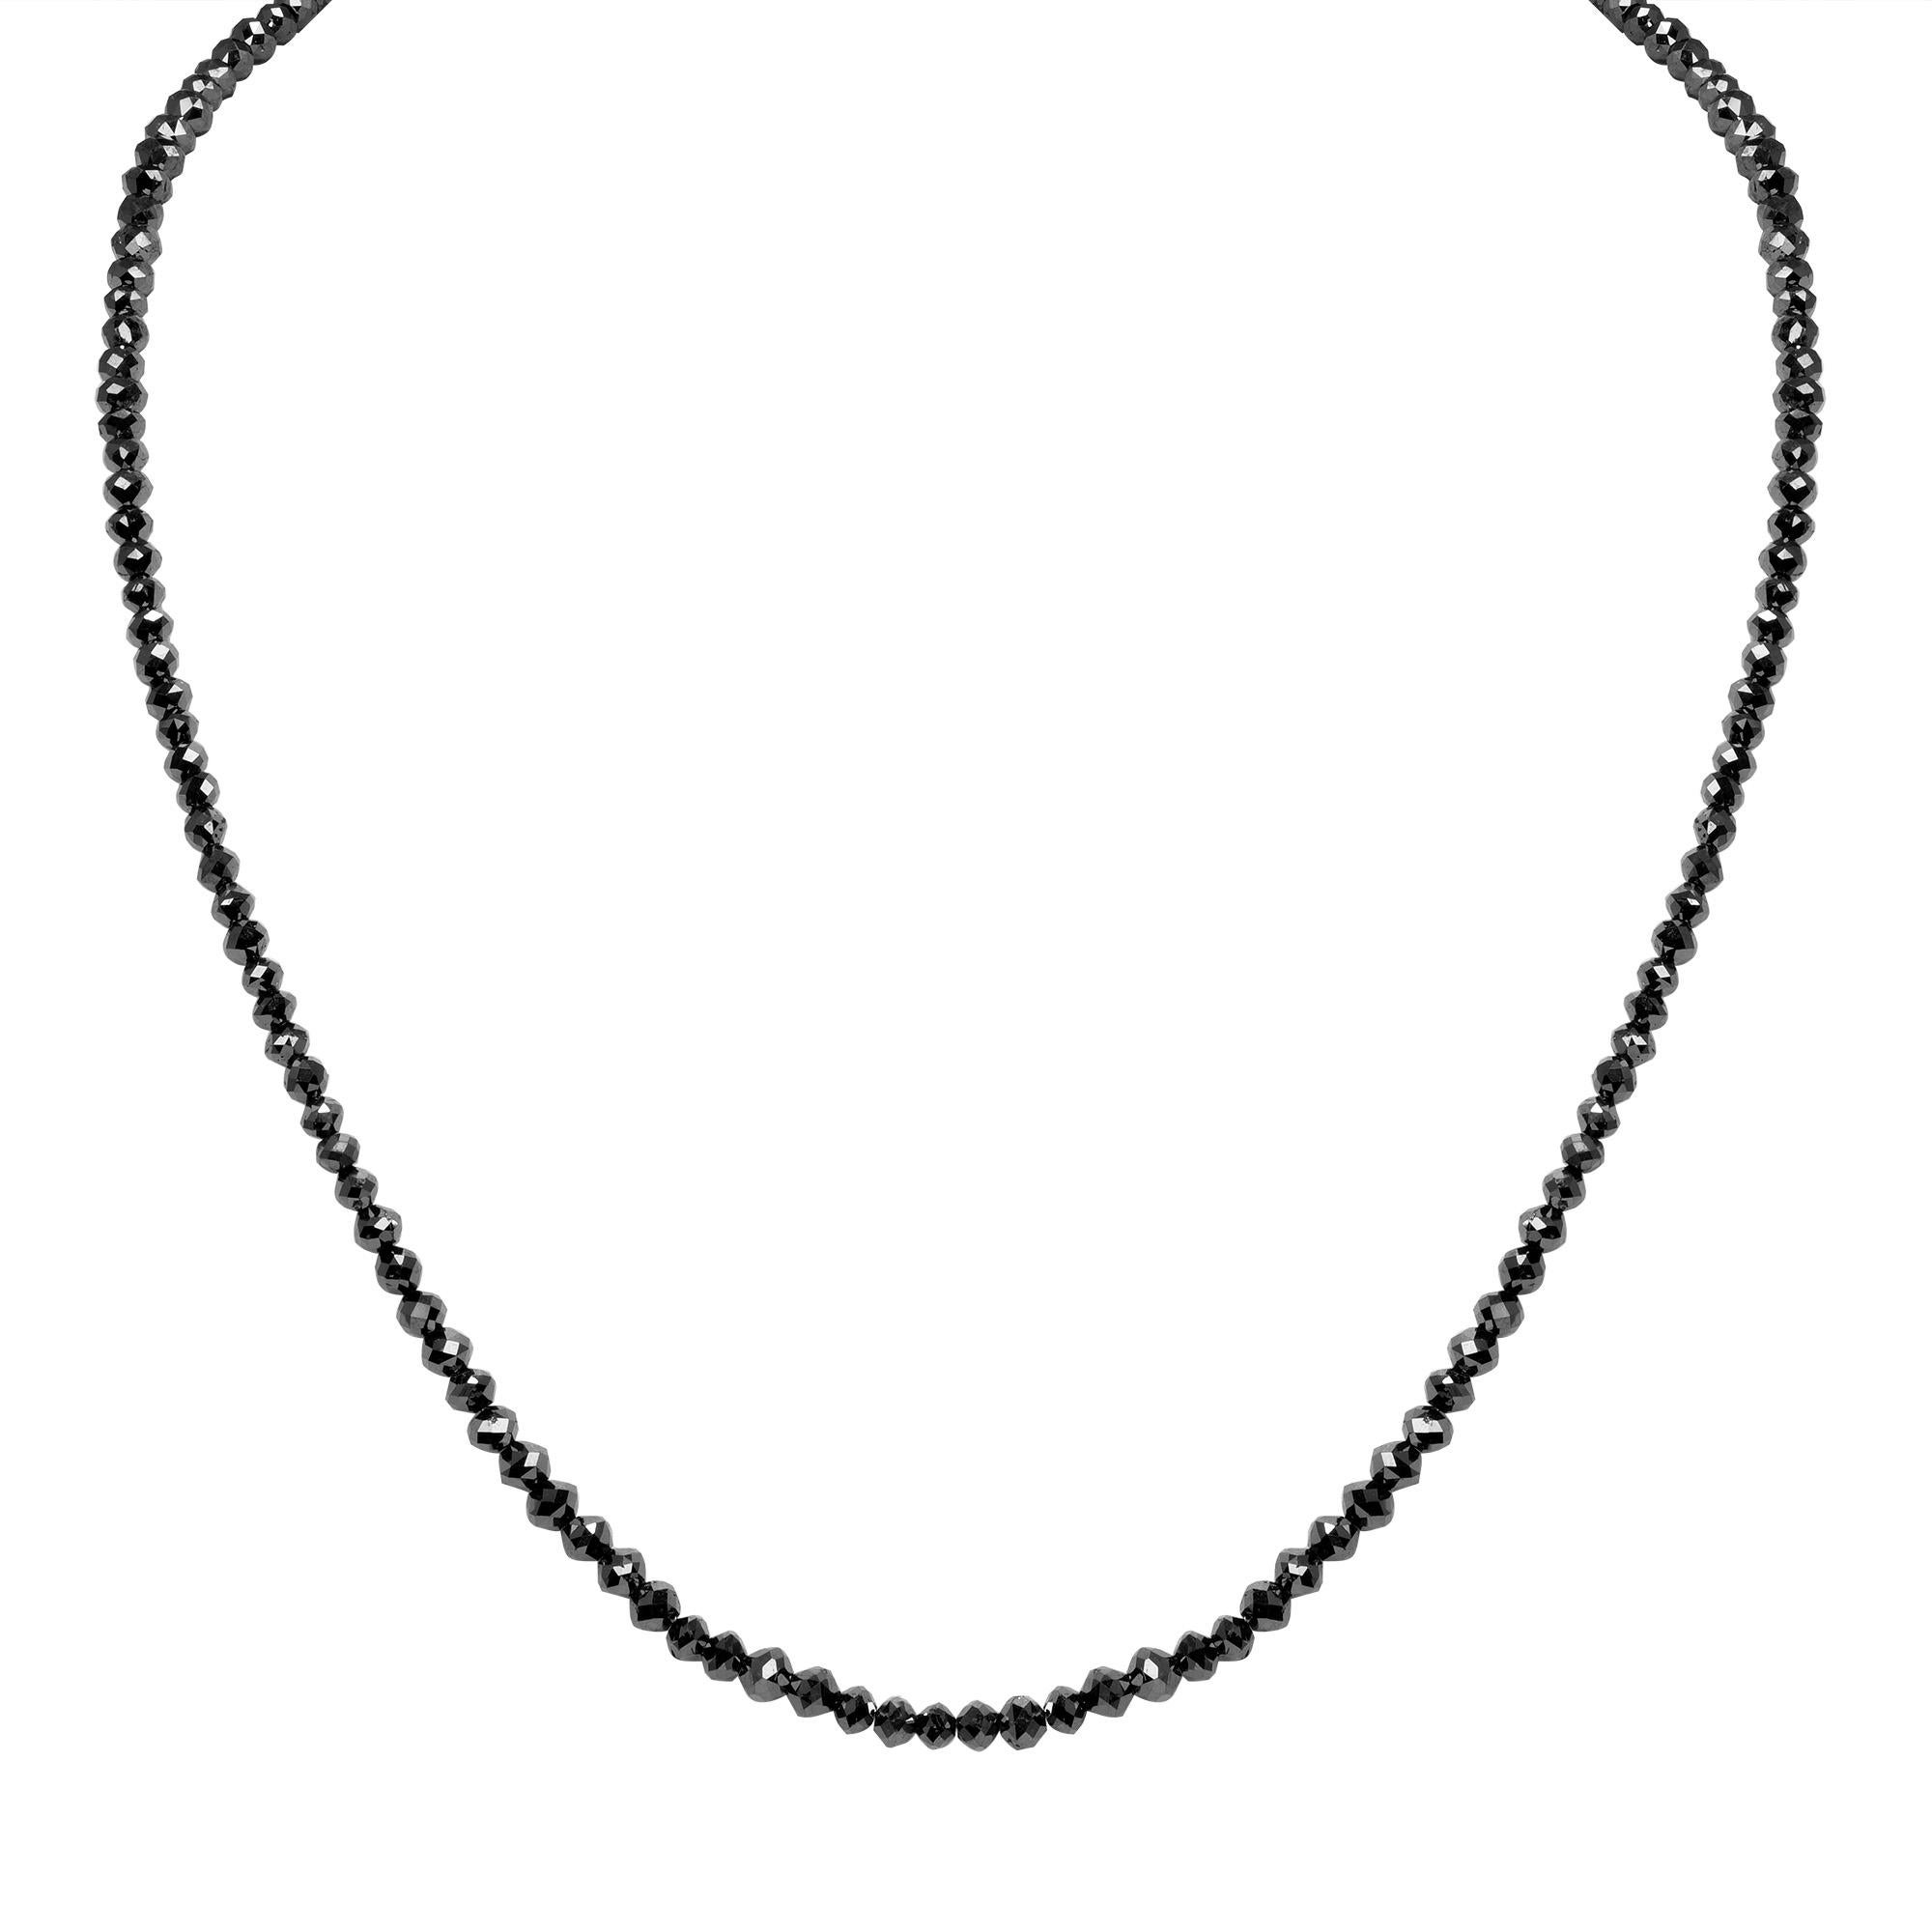 This stunning 36.72 Carat Black Diamond Briolette Bead Necklace is made out of natural black diamonds. 
Each black diamond is averaging 3.6 mm in diameter. 
The necklace is 16-3/4 inches long and comes in a beautiful black presentation box. 